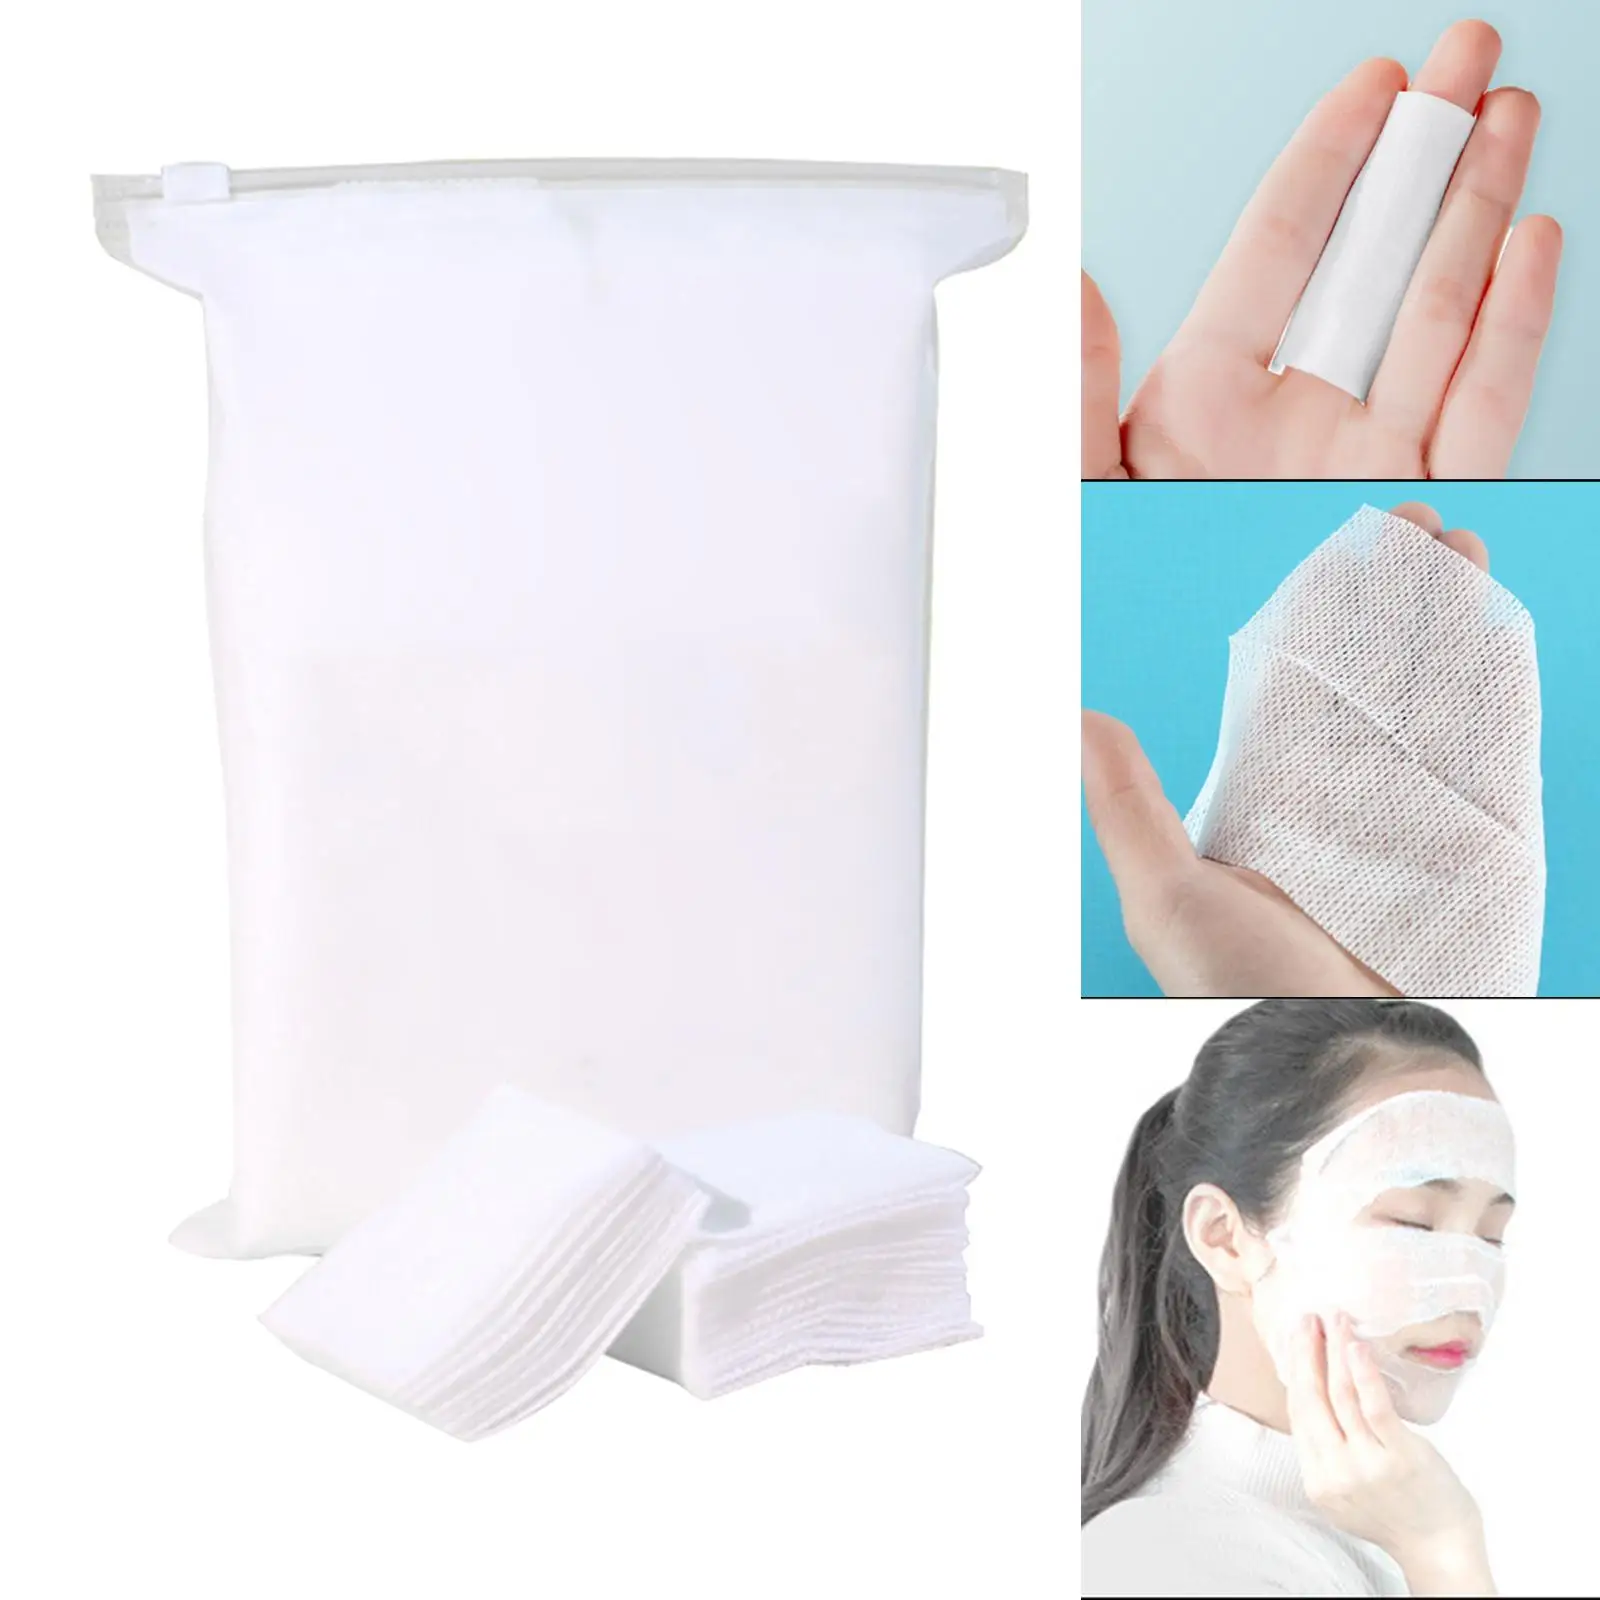 600x Stretchy Cotton Pads Unbleached Breathable Thin Makeup Remover Pads for Absorbent Toner Skincare DIY Face Mask Nails Facial